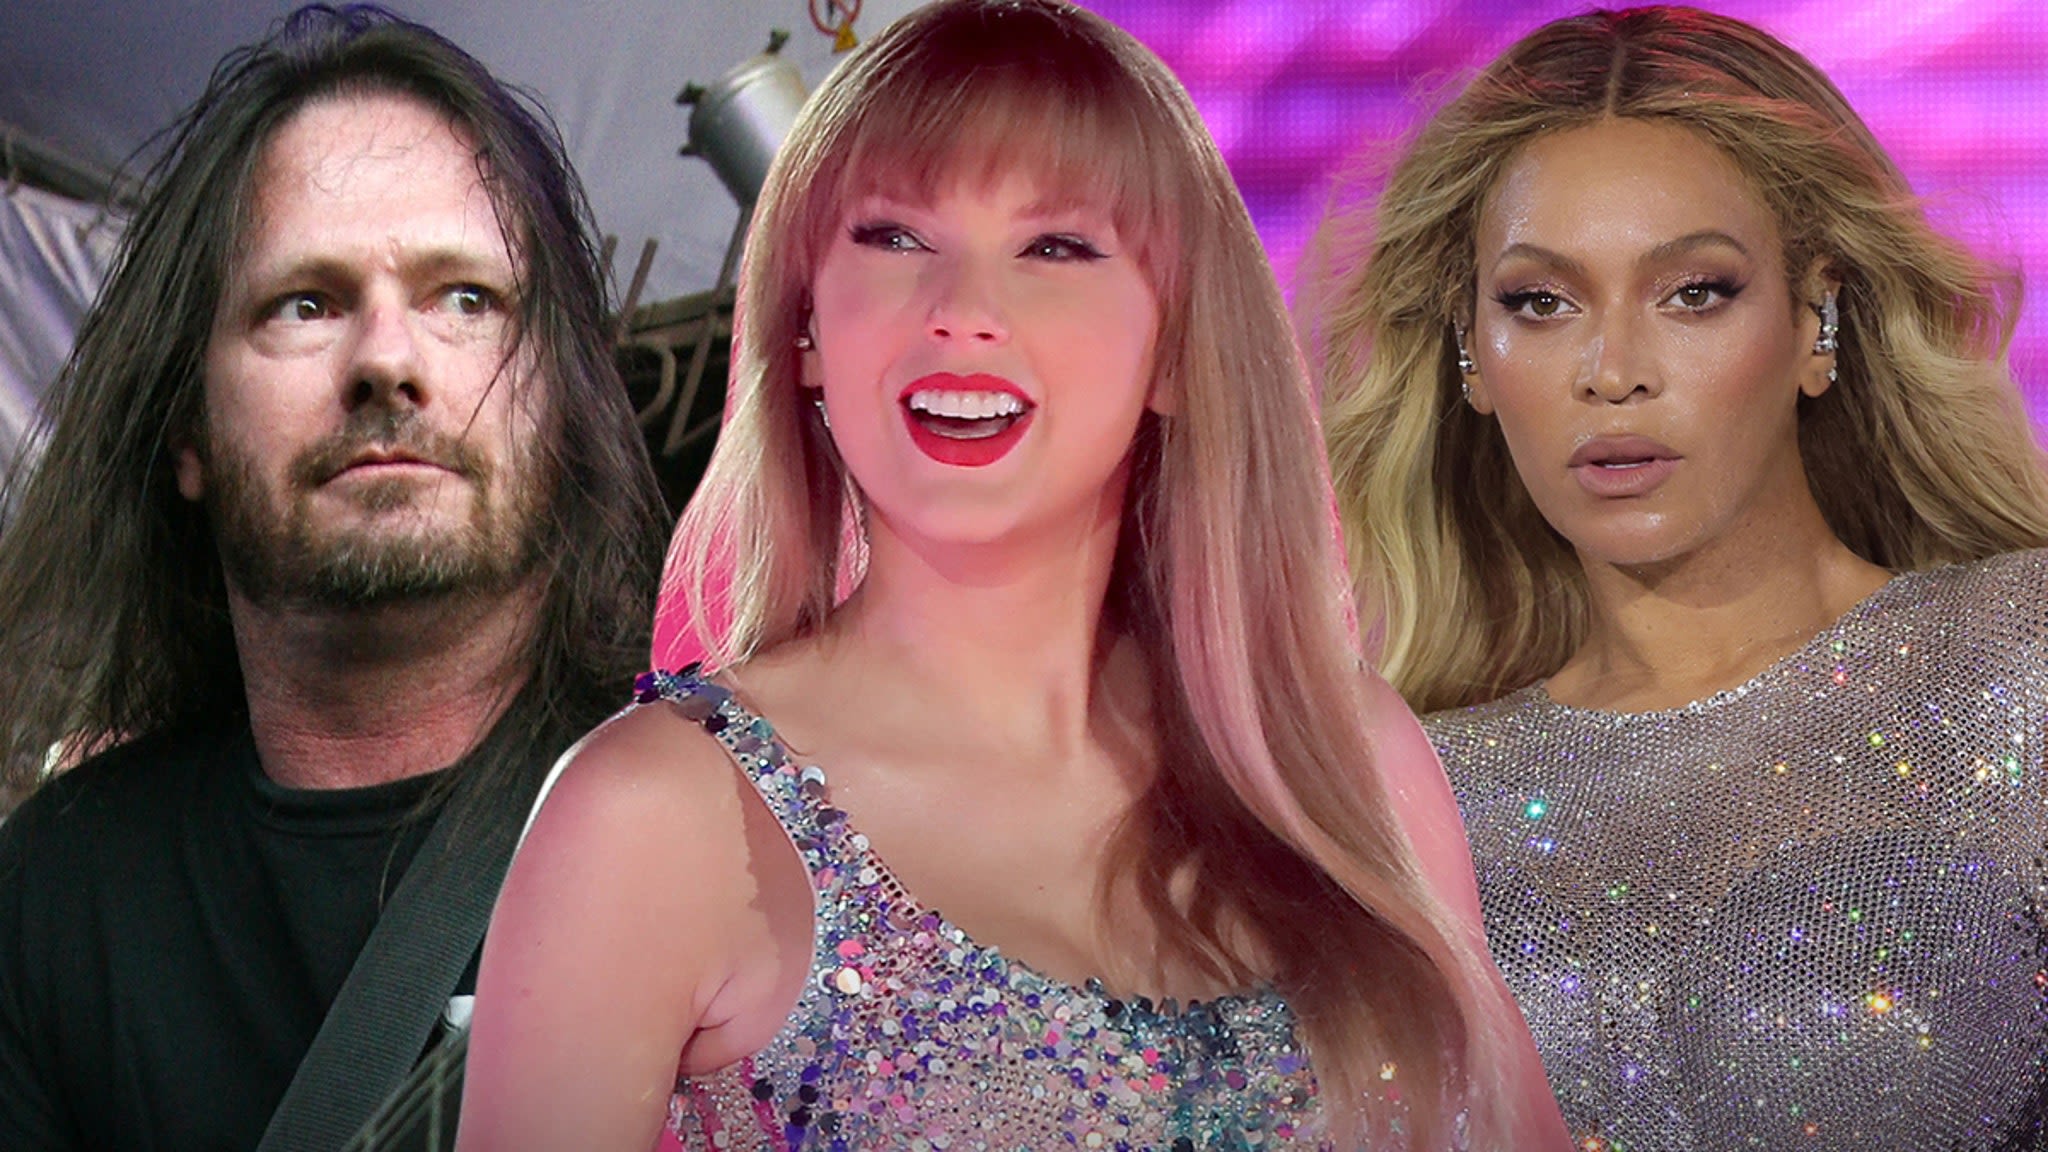 Beyoncé's Overrated & Taylor Swift Way More Talented, Says Exodus Guitarist